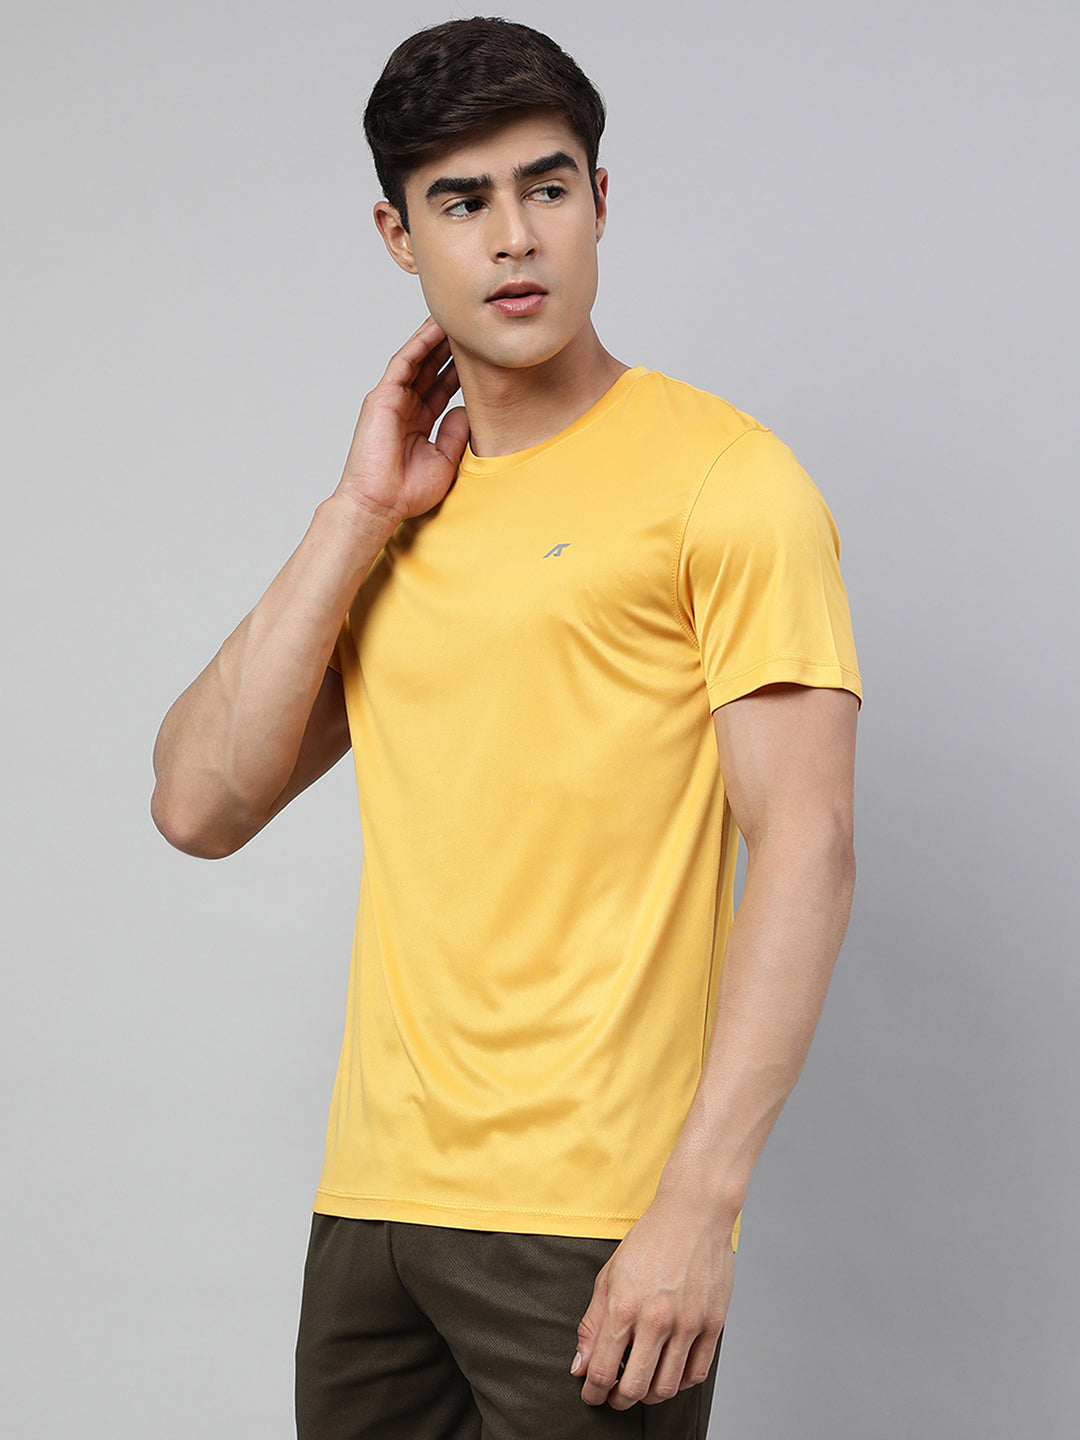 Alcis Men's Citrus Anti-Static Soft-Touch Slim-Fit Sports for All Round Neck Wonder T-Shirt